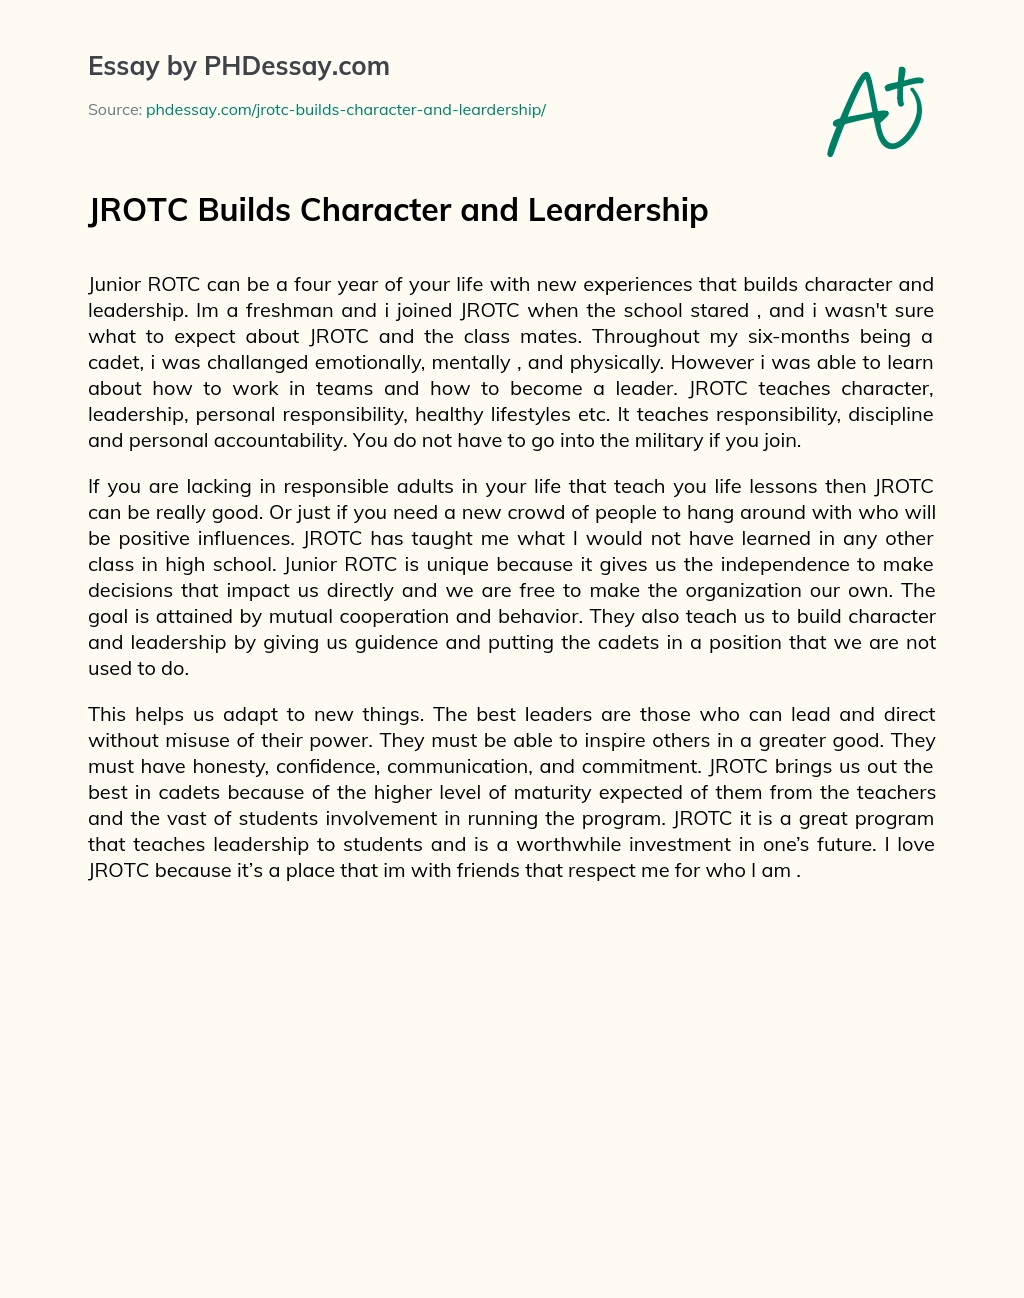 JROTC Builds Character and Leardership essay